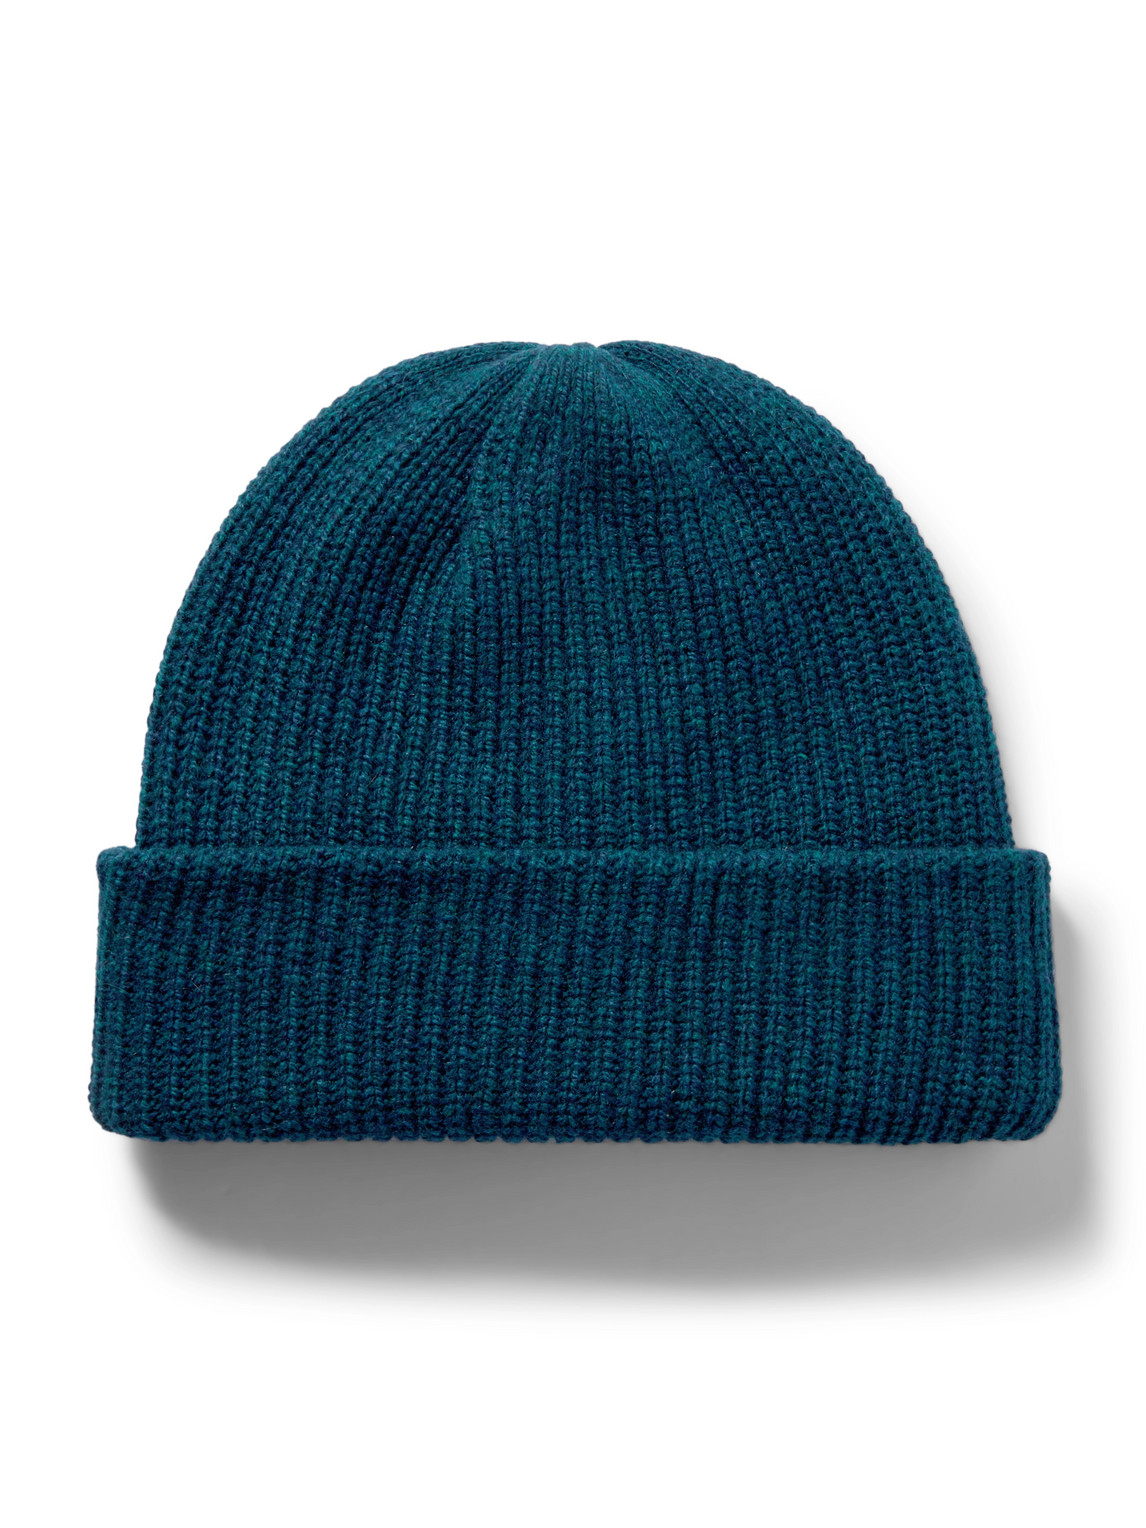 Watchman Ribbed Cashmere Beanie